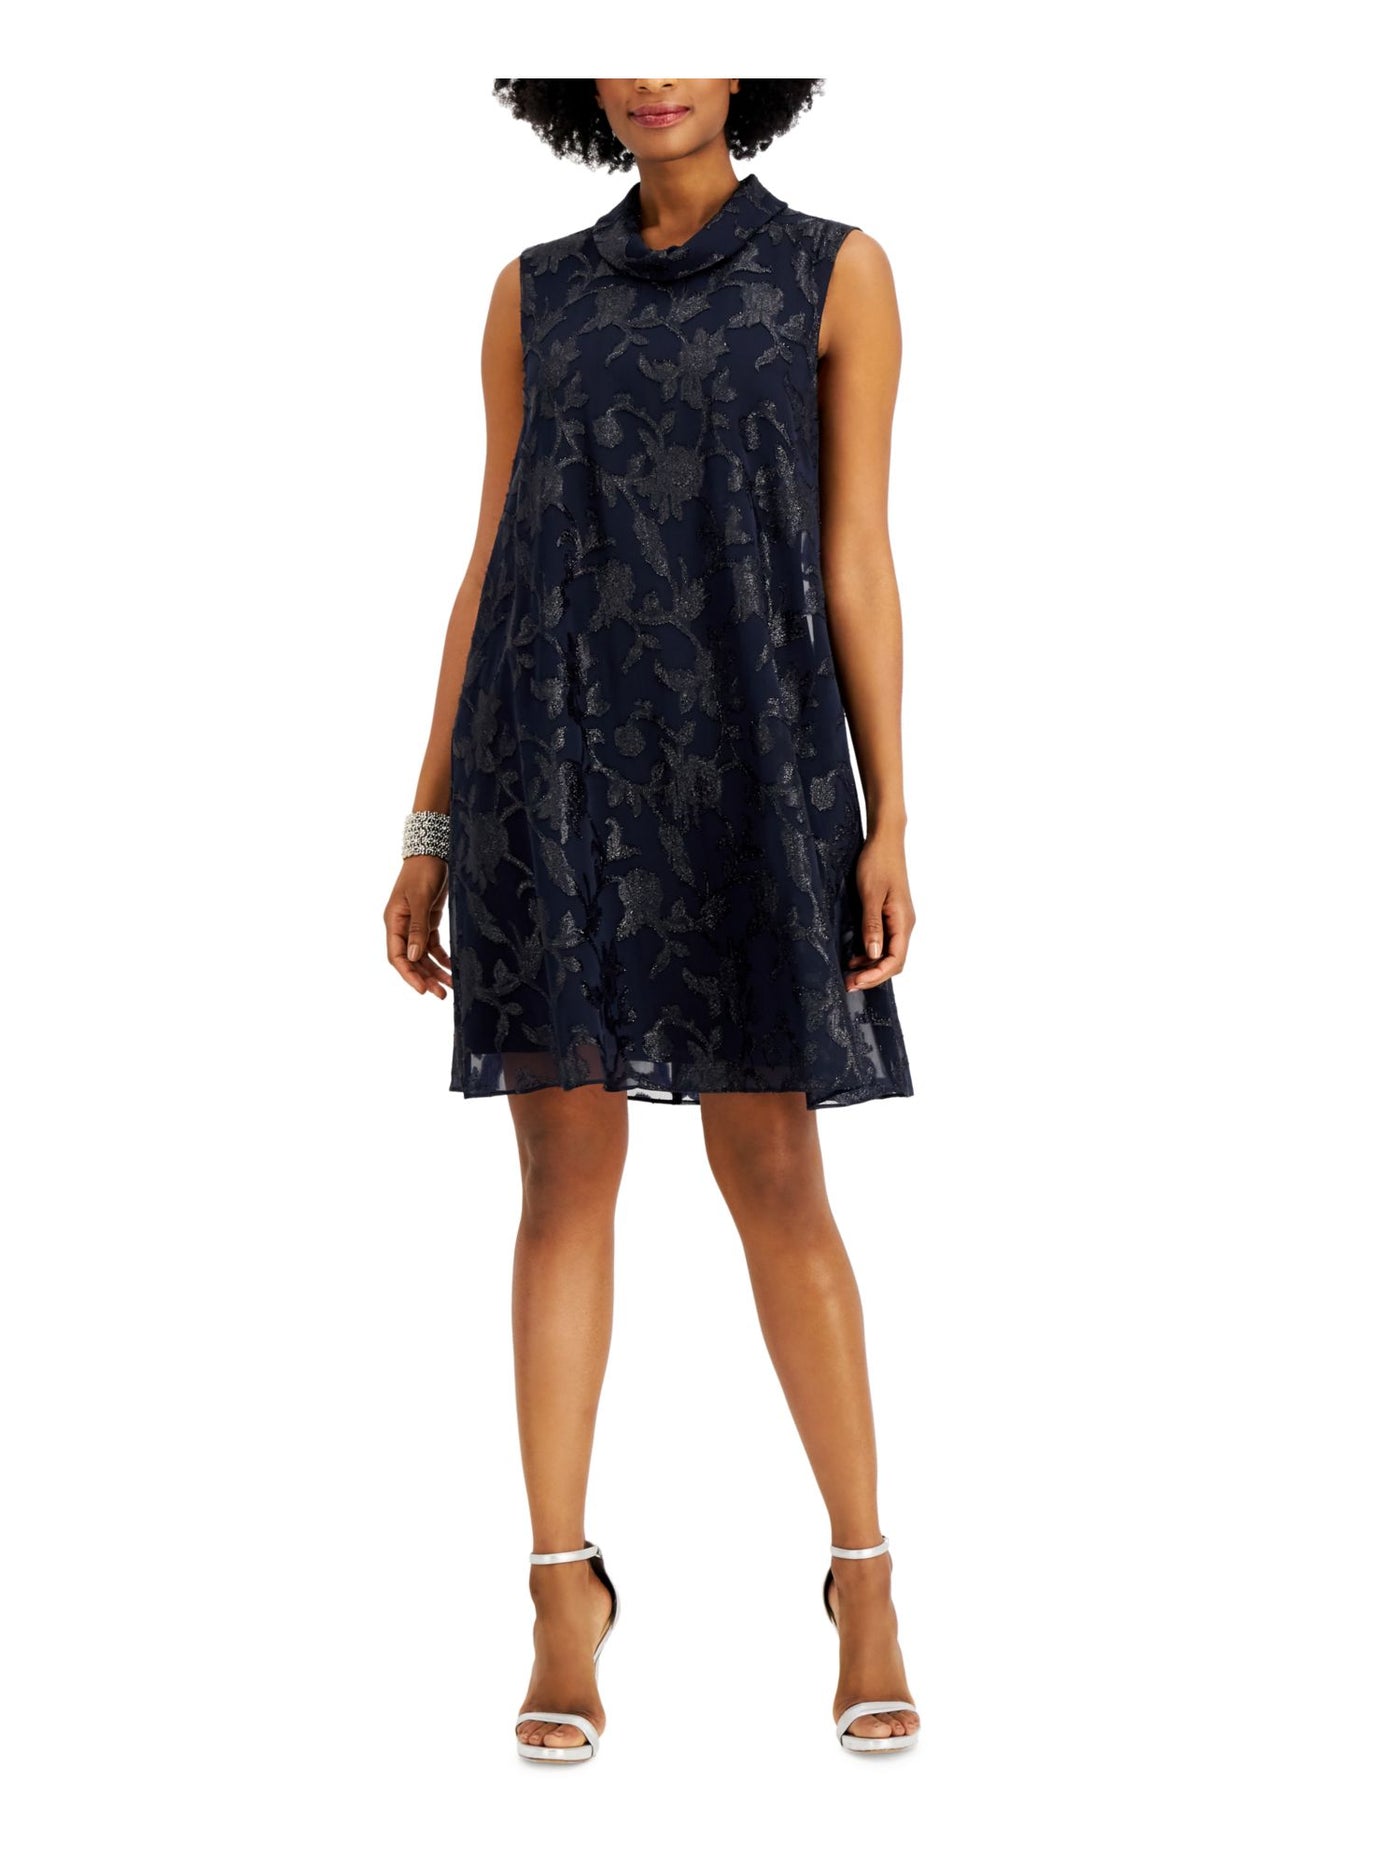 CONNECTED APPAREL Womens Navy Floral Sleeveless Above The Knee Cocktail Shift Dress 8